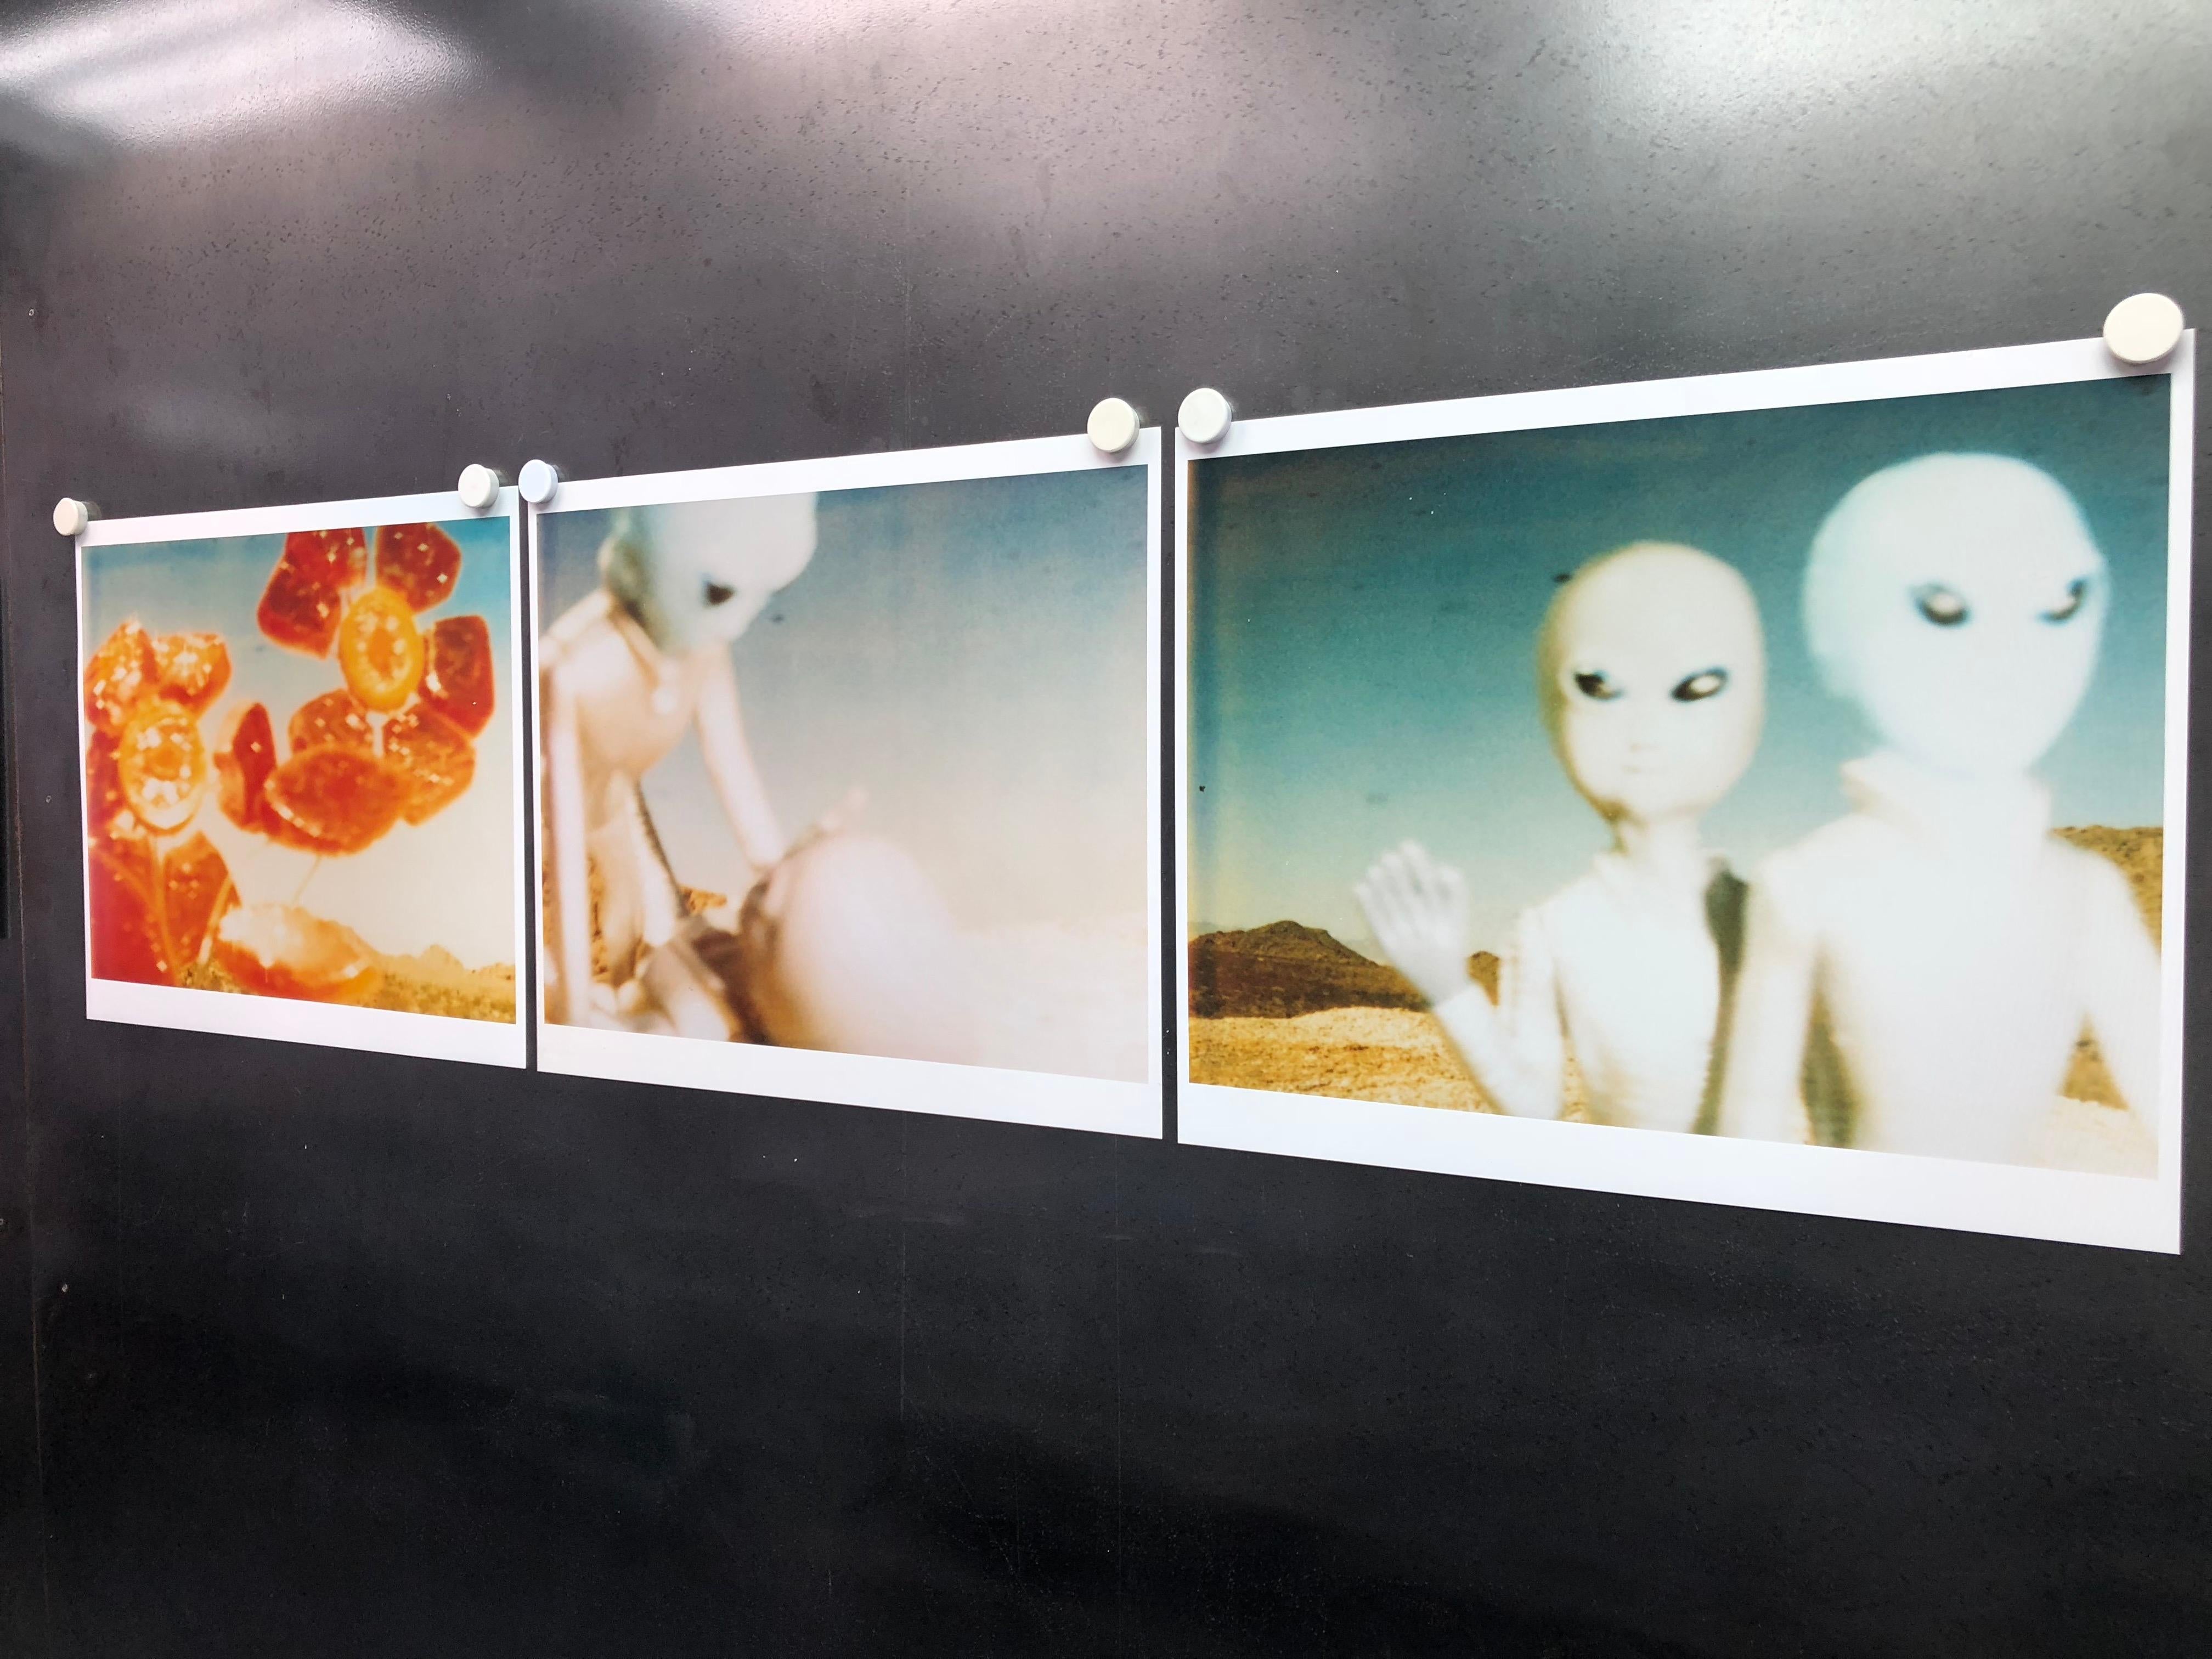 Aliens, triptych - 1998

Edition of 5, 
48x59cm each, 48x190 installed including the gaps.
analog C-Print, hand-printed by the artist on Fuji Crystal Archive Paper, matte finish, 
based on a Polaroid, Certificate and signature label
artist inventory